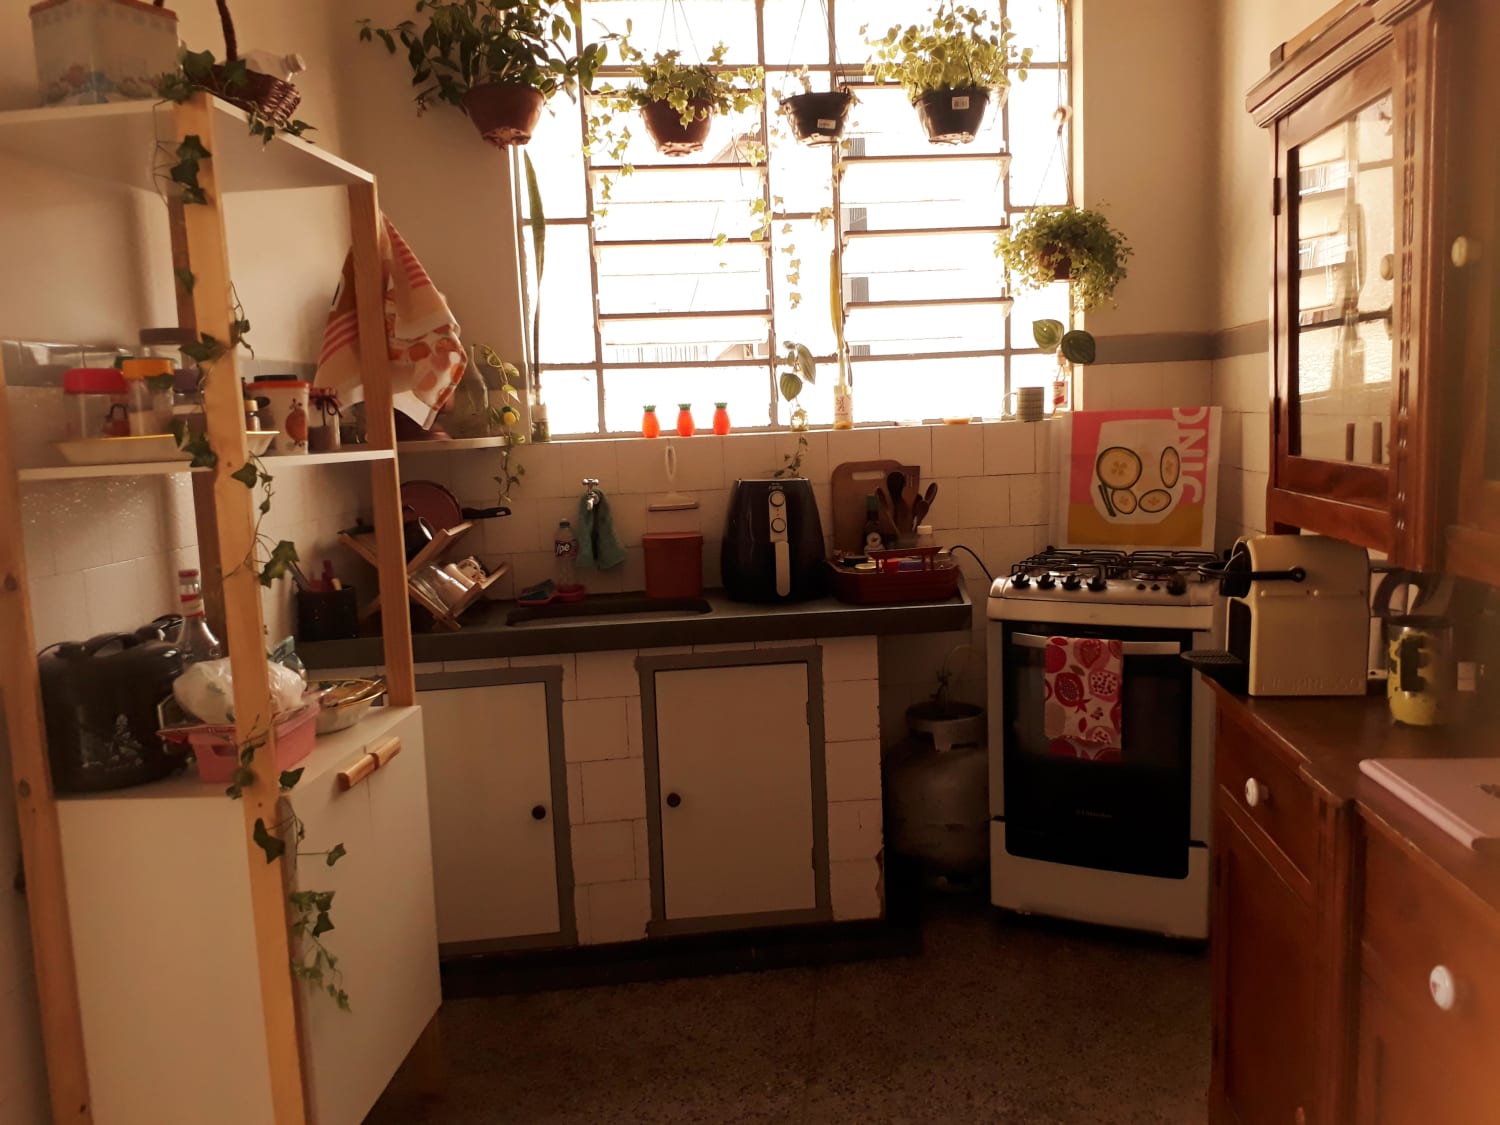 My little kitchen in a 60s apartment - Brazil